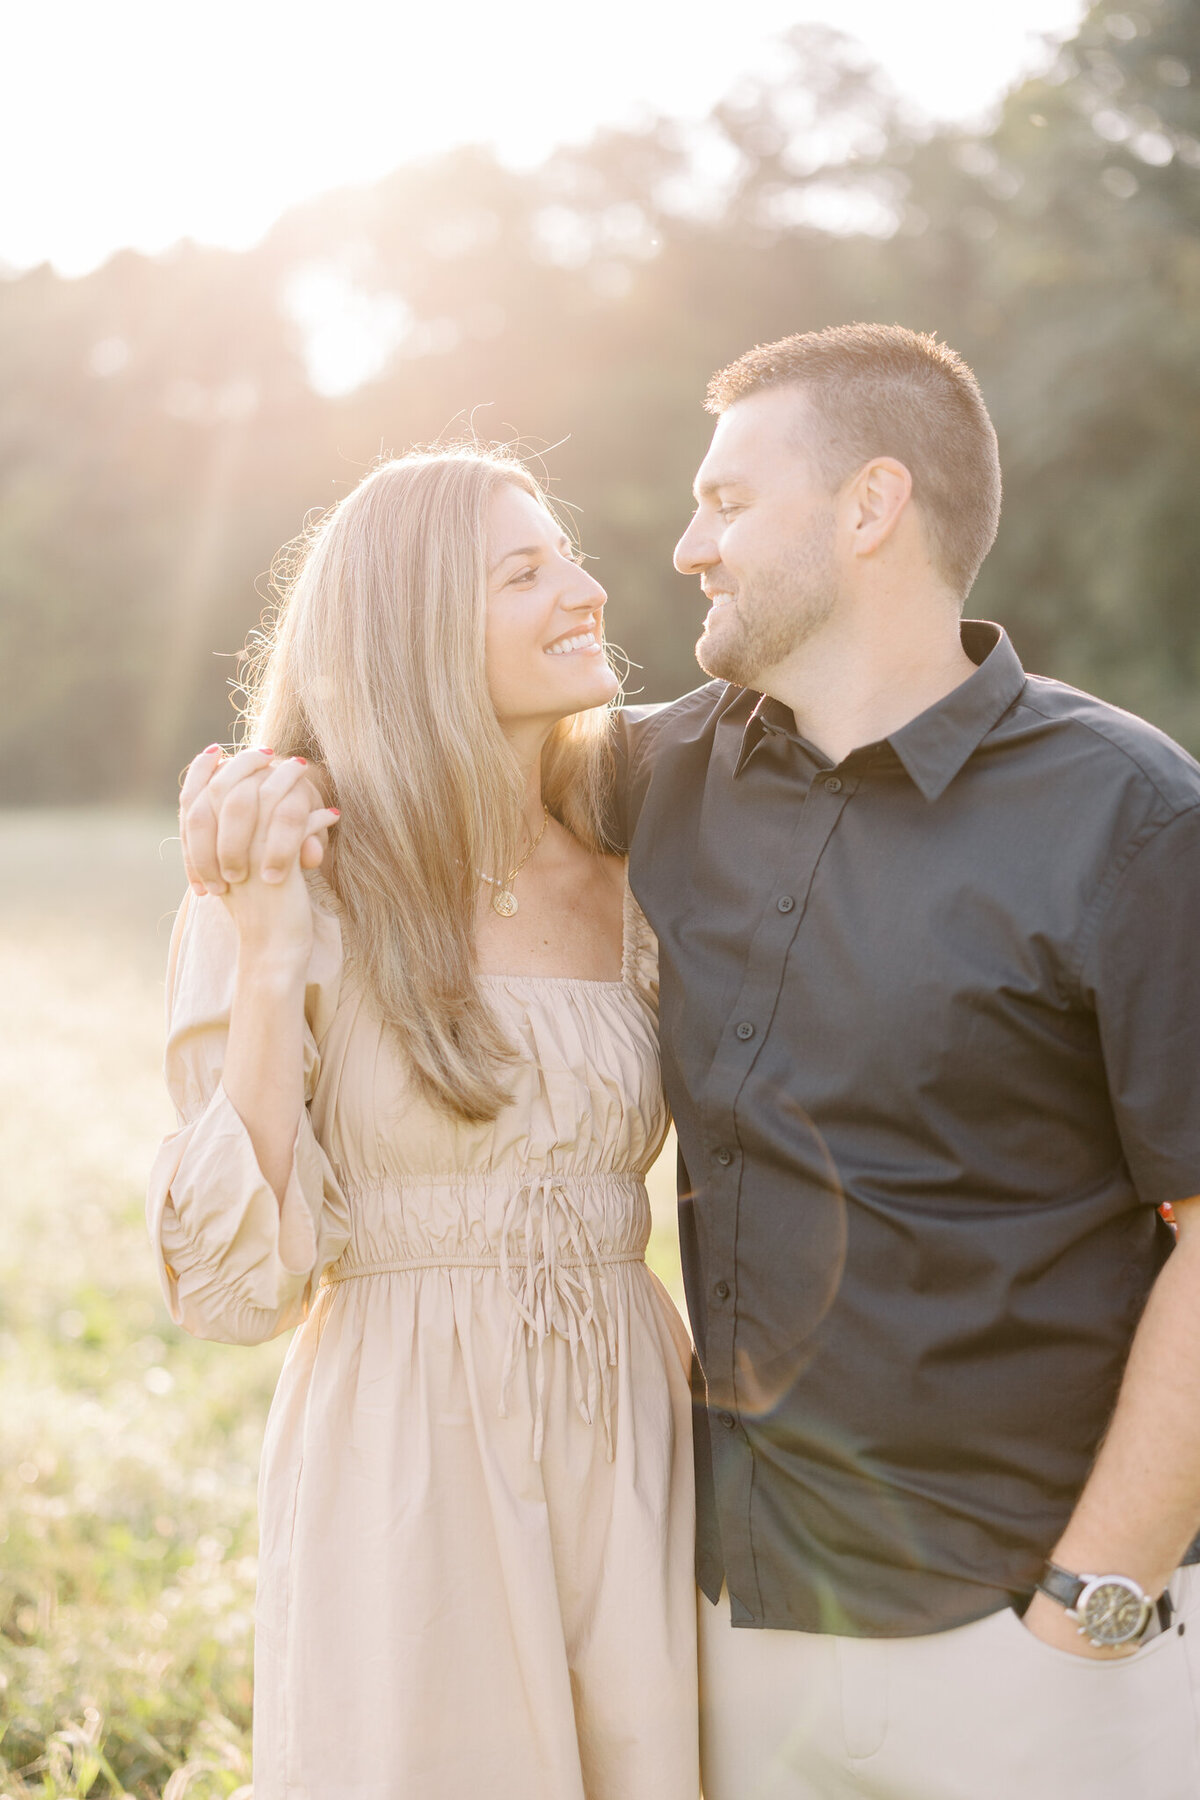 Sunset Field in PA Engagement Session | Ashlee Zimmerman